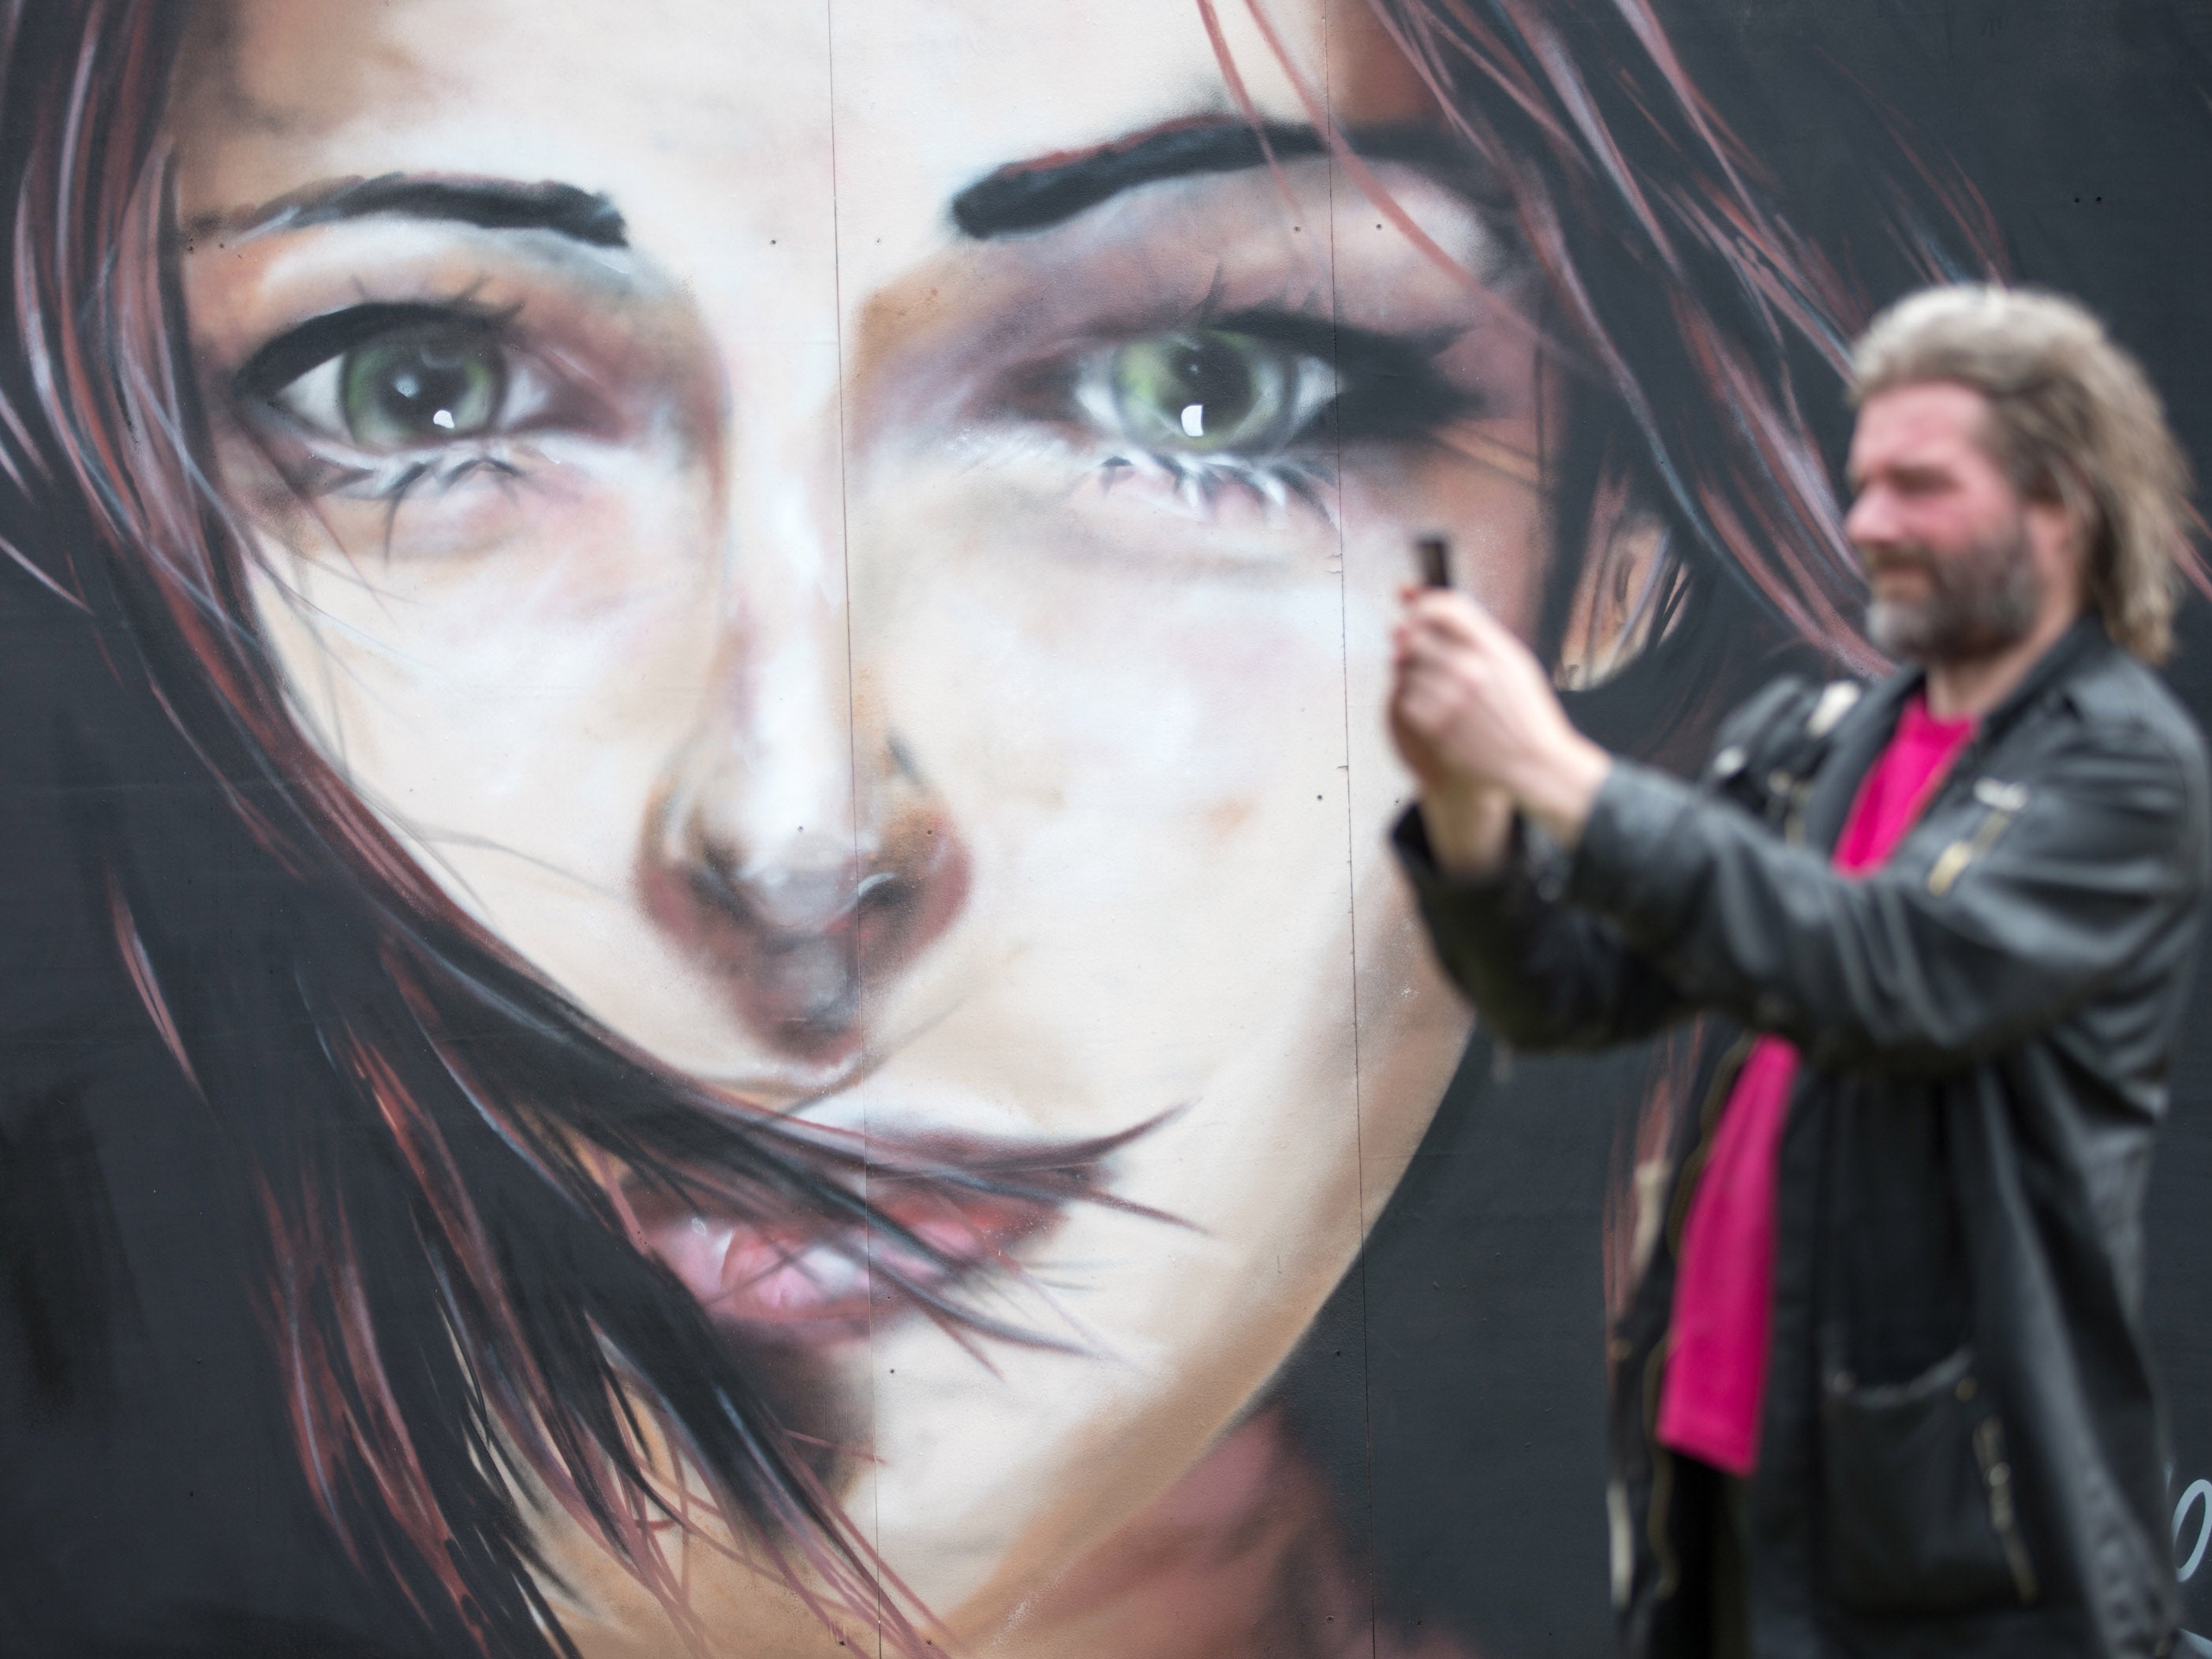 Street Art Fans have since flooded Bristol to see the finished murals